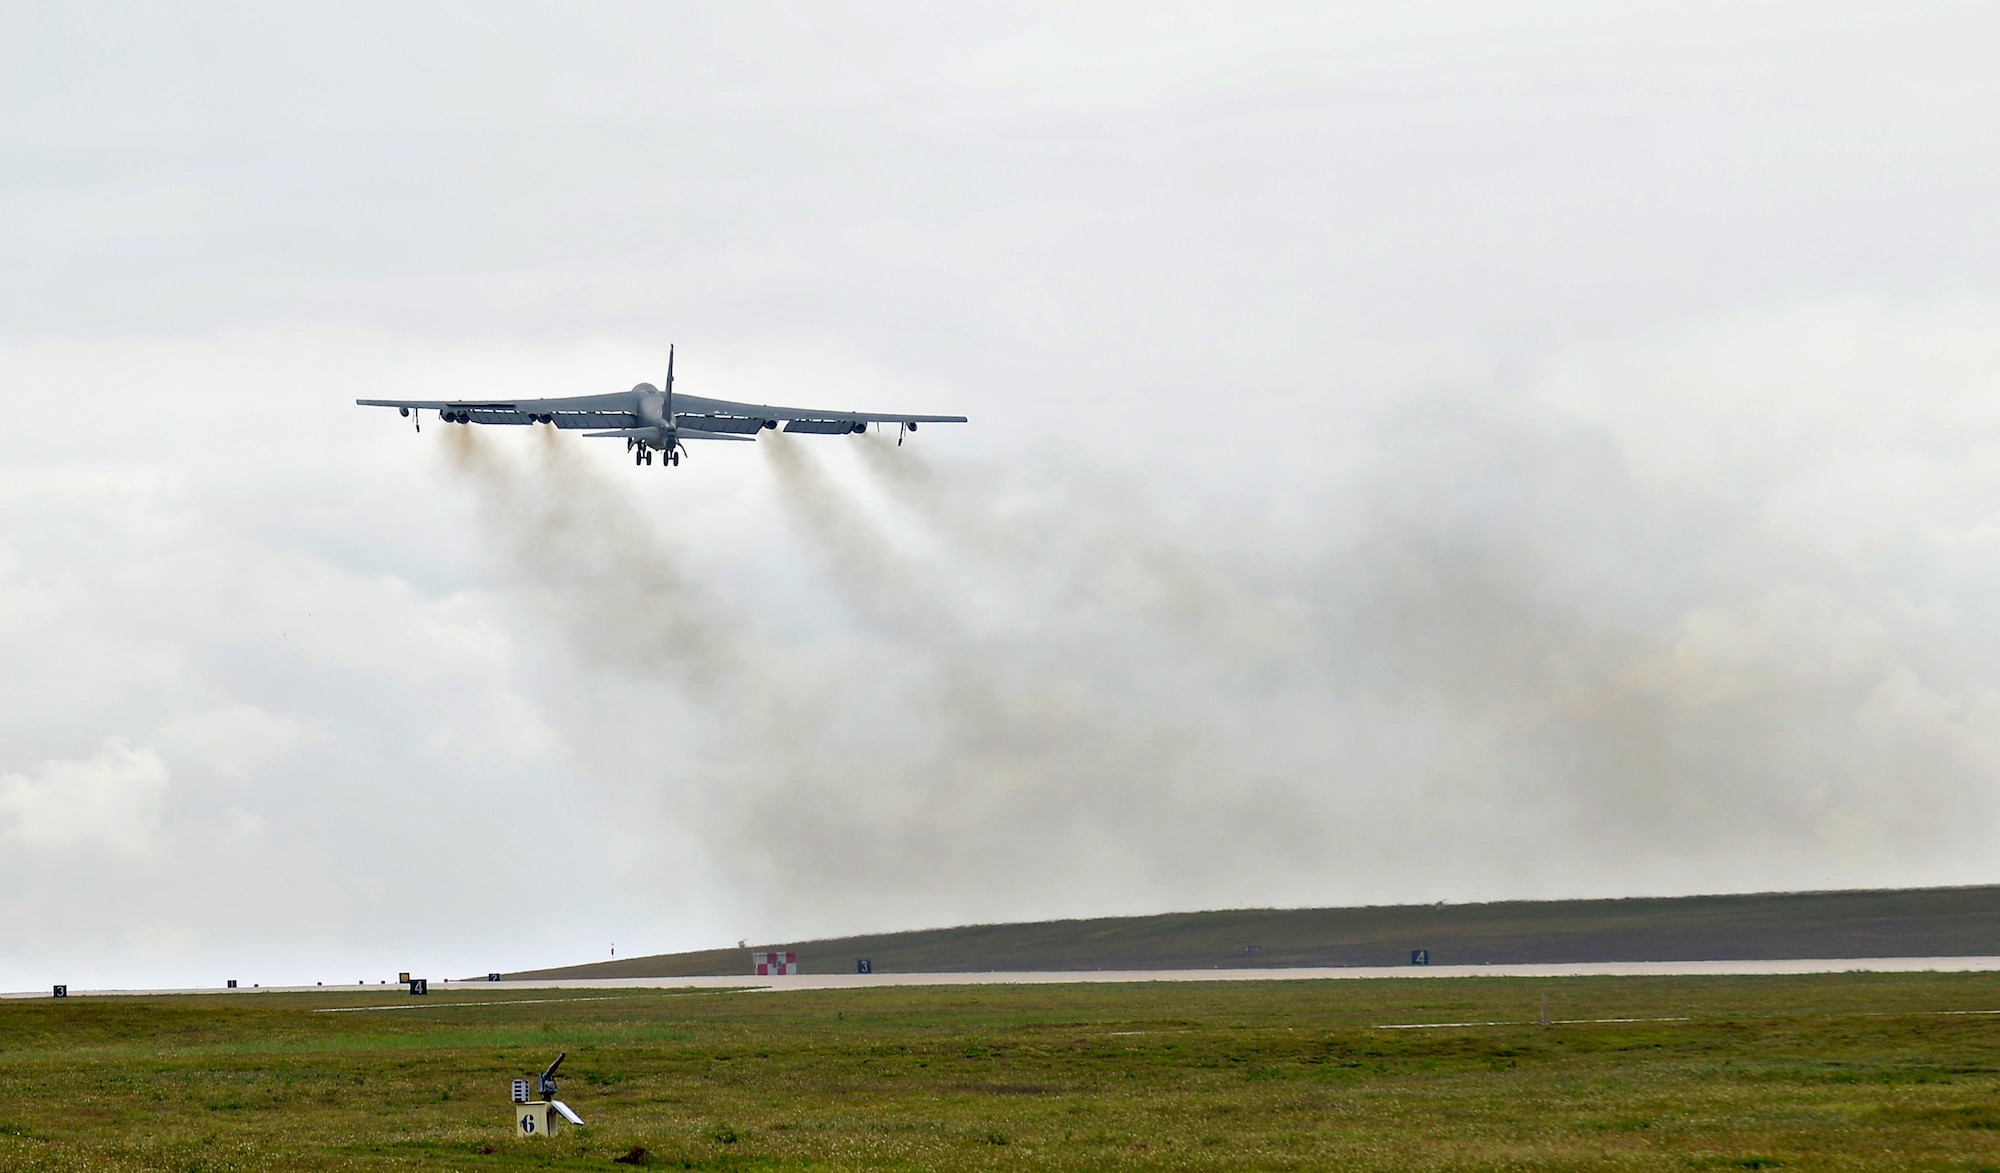 A U.S. Air Force B-52 Stratofortress bomber takes off April 14, 2016, from Andersen Air Force Base, Guam. The U.S. conducts continuous bomber presence operations as part of a routine, forward deployed, global strike capability supporting regional security and our allies in the Indo-Asia-Pacific region. (U.S. Air Force photo by Airman 1st Class Arielle Vasquez/Released)